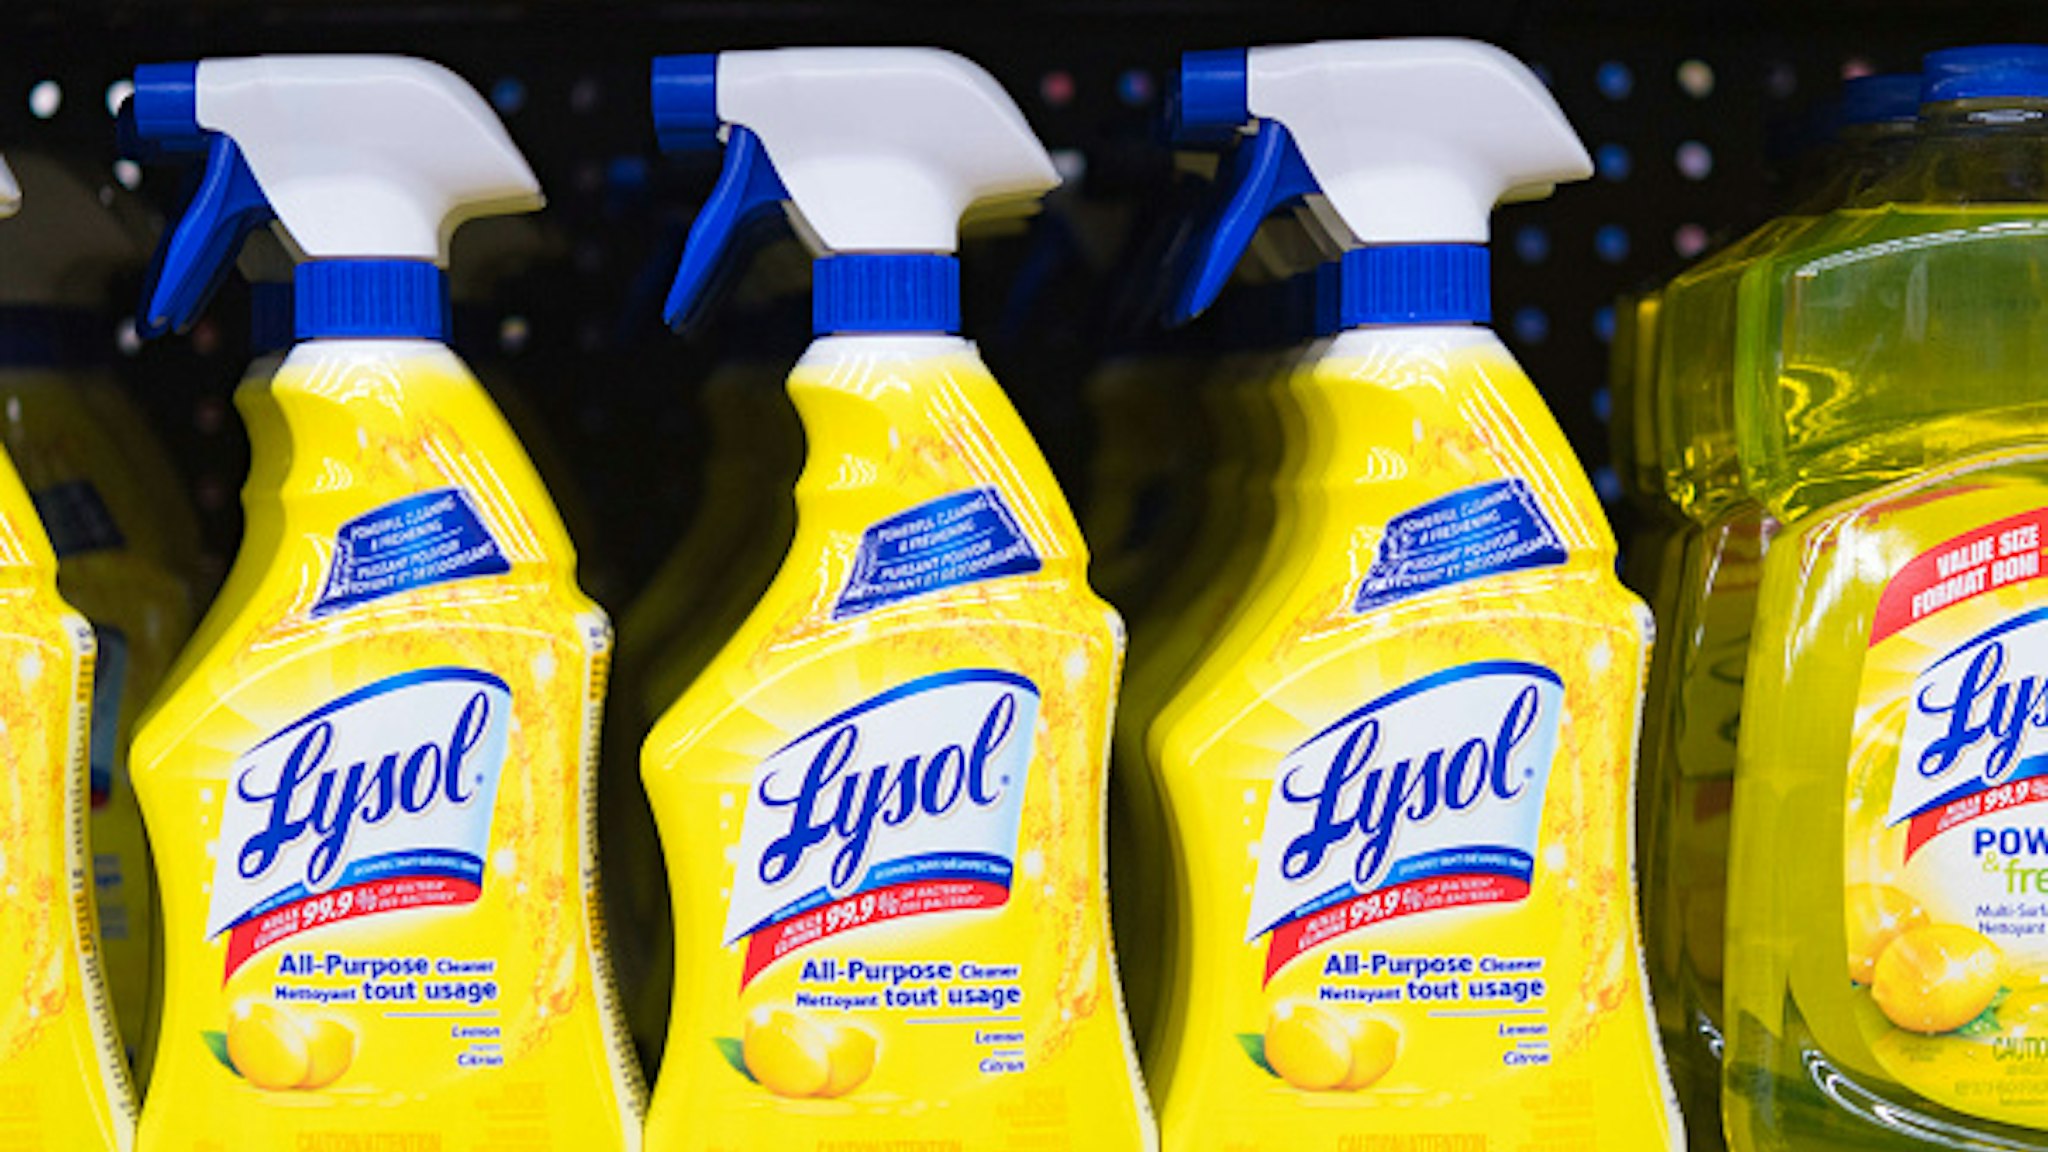 Lysol bottles on a store shelf, plastic spray bottles of all-purpose cleaner. The product is distributed by Reckitt Benckiser. (Photo by Roberto Machado Noa/LightRocket via Getty Images)